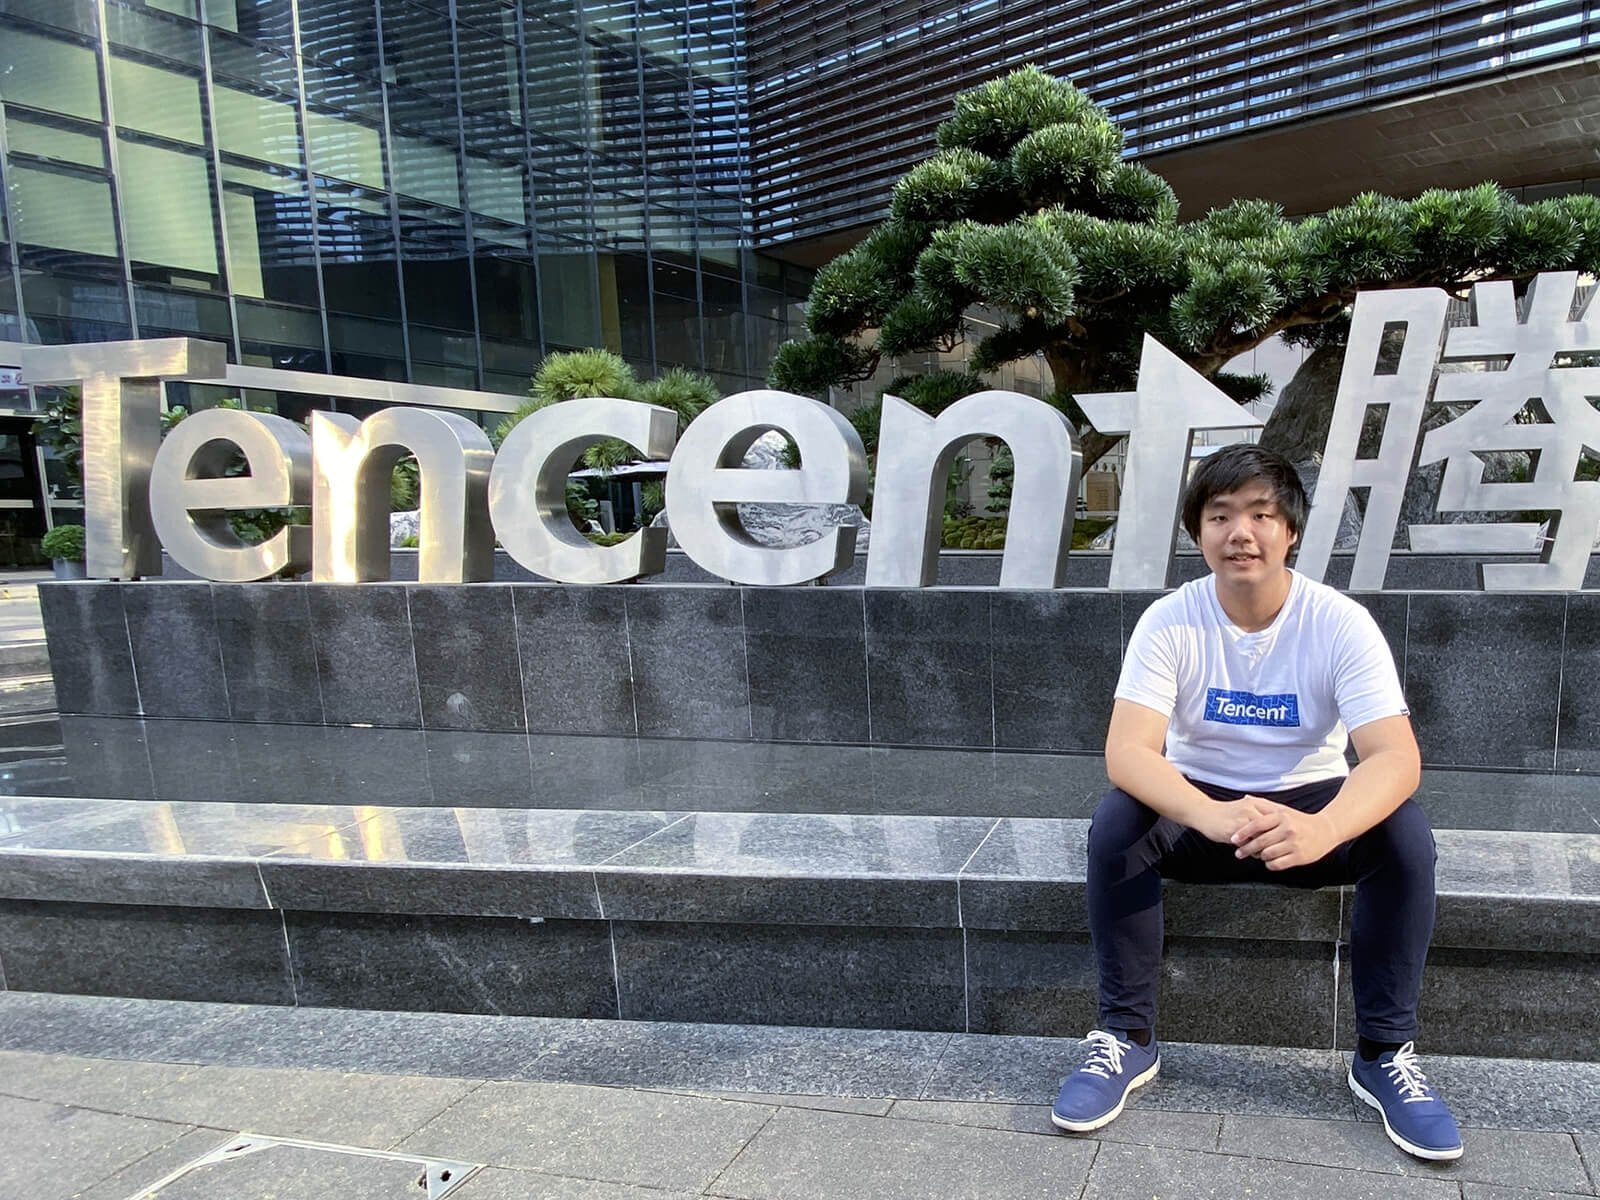 Sim Yi Cong sits by a pool in front of a large Tencent logo sign outside the Tencent headquarters building.